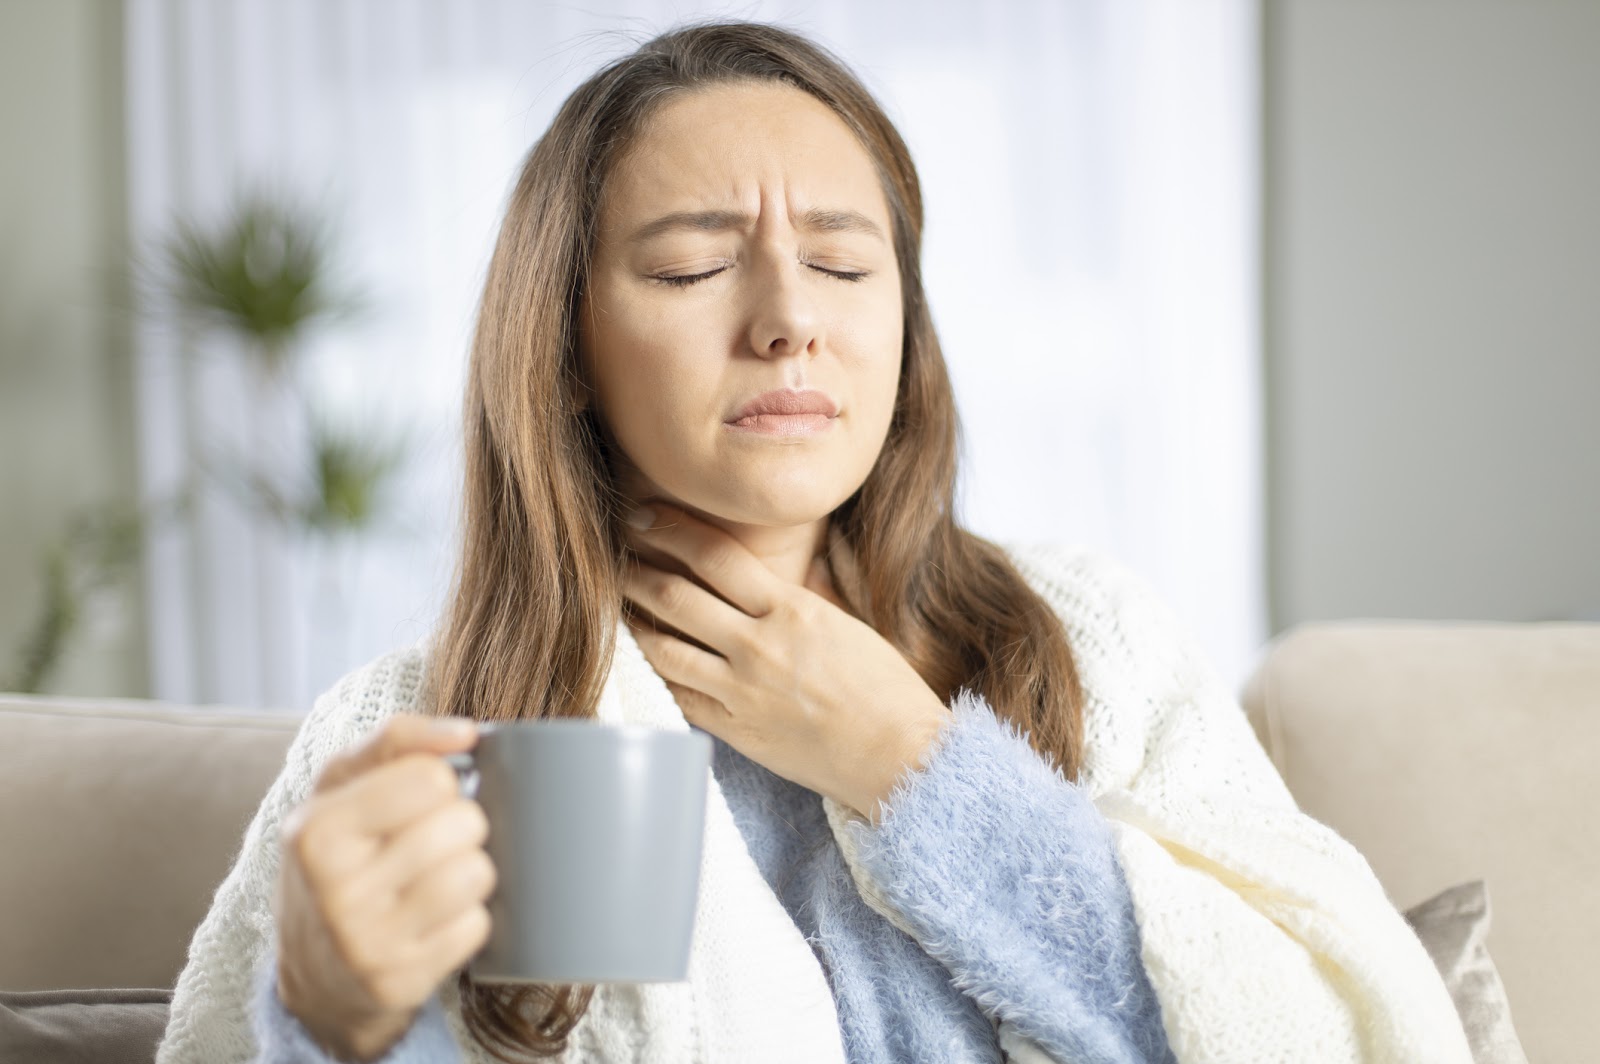 What are the Symptoms of Throat Infection and the Treatment for Throat Infection?